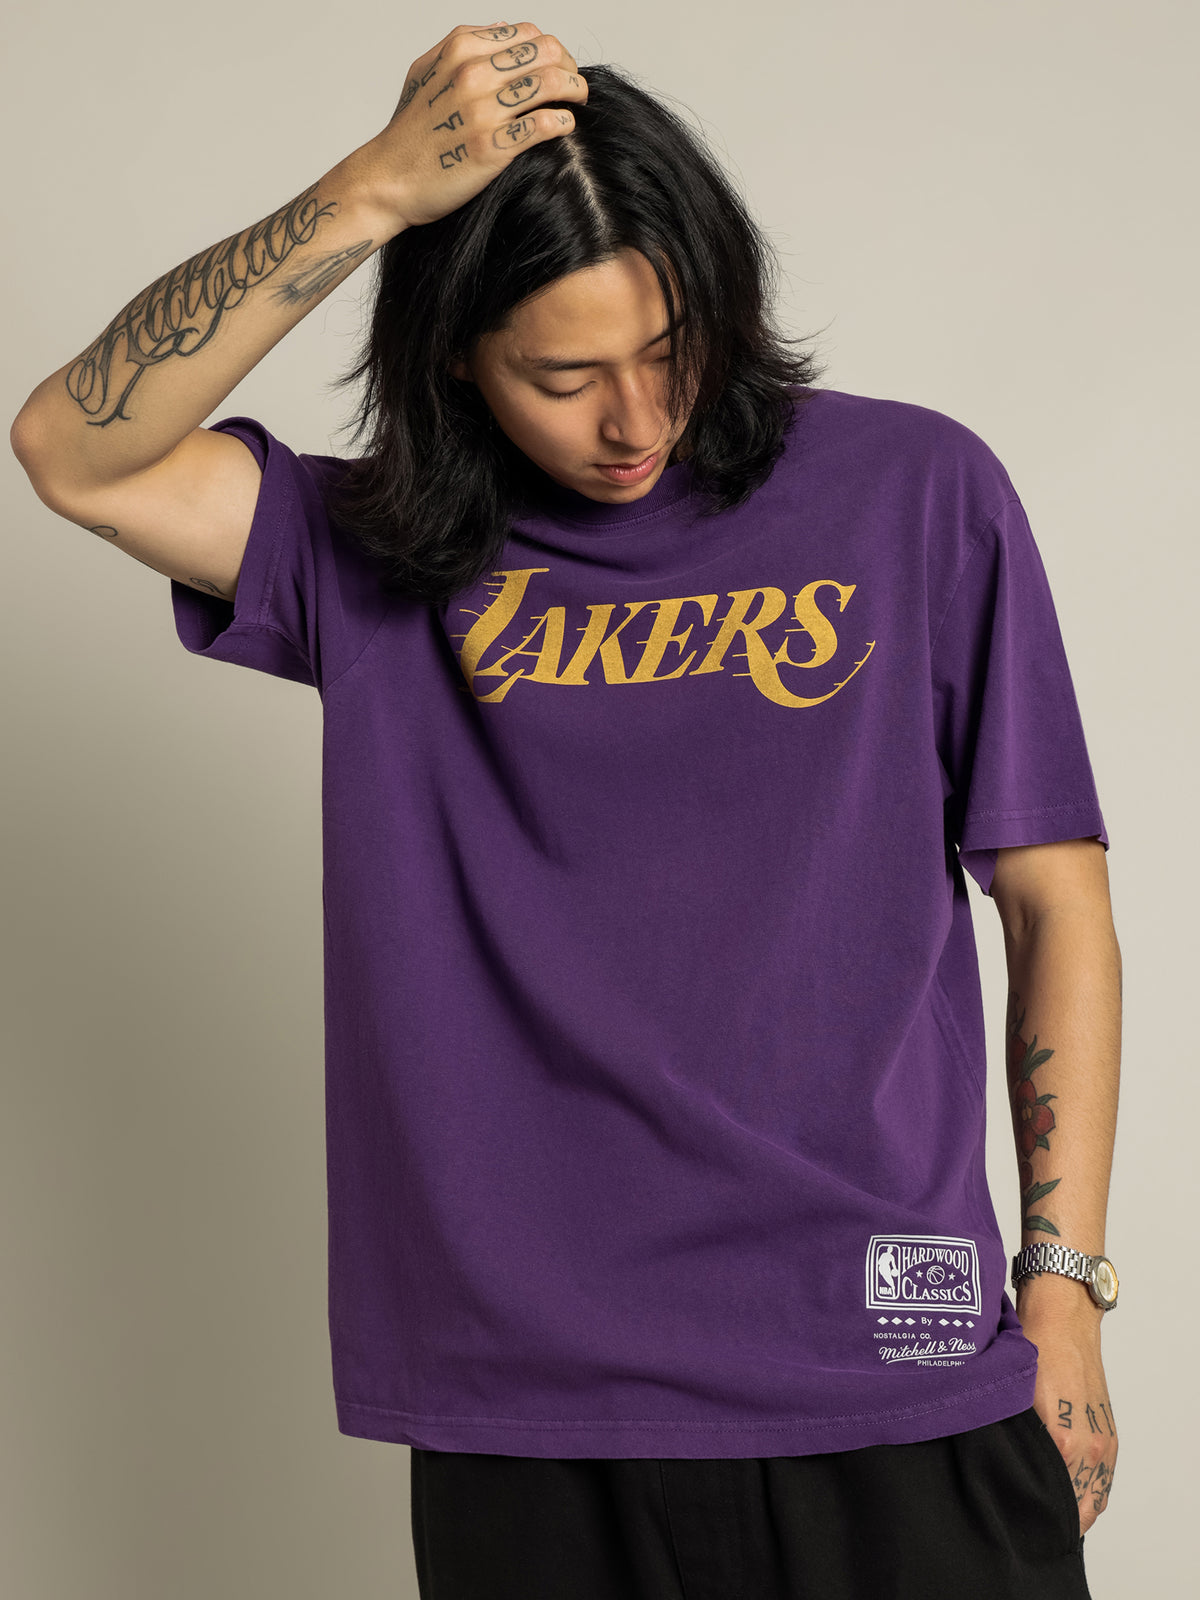 Vintage Back to Back LA Lakers T-Shirt in Faded Deep Purple